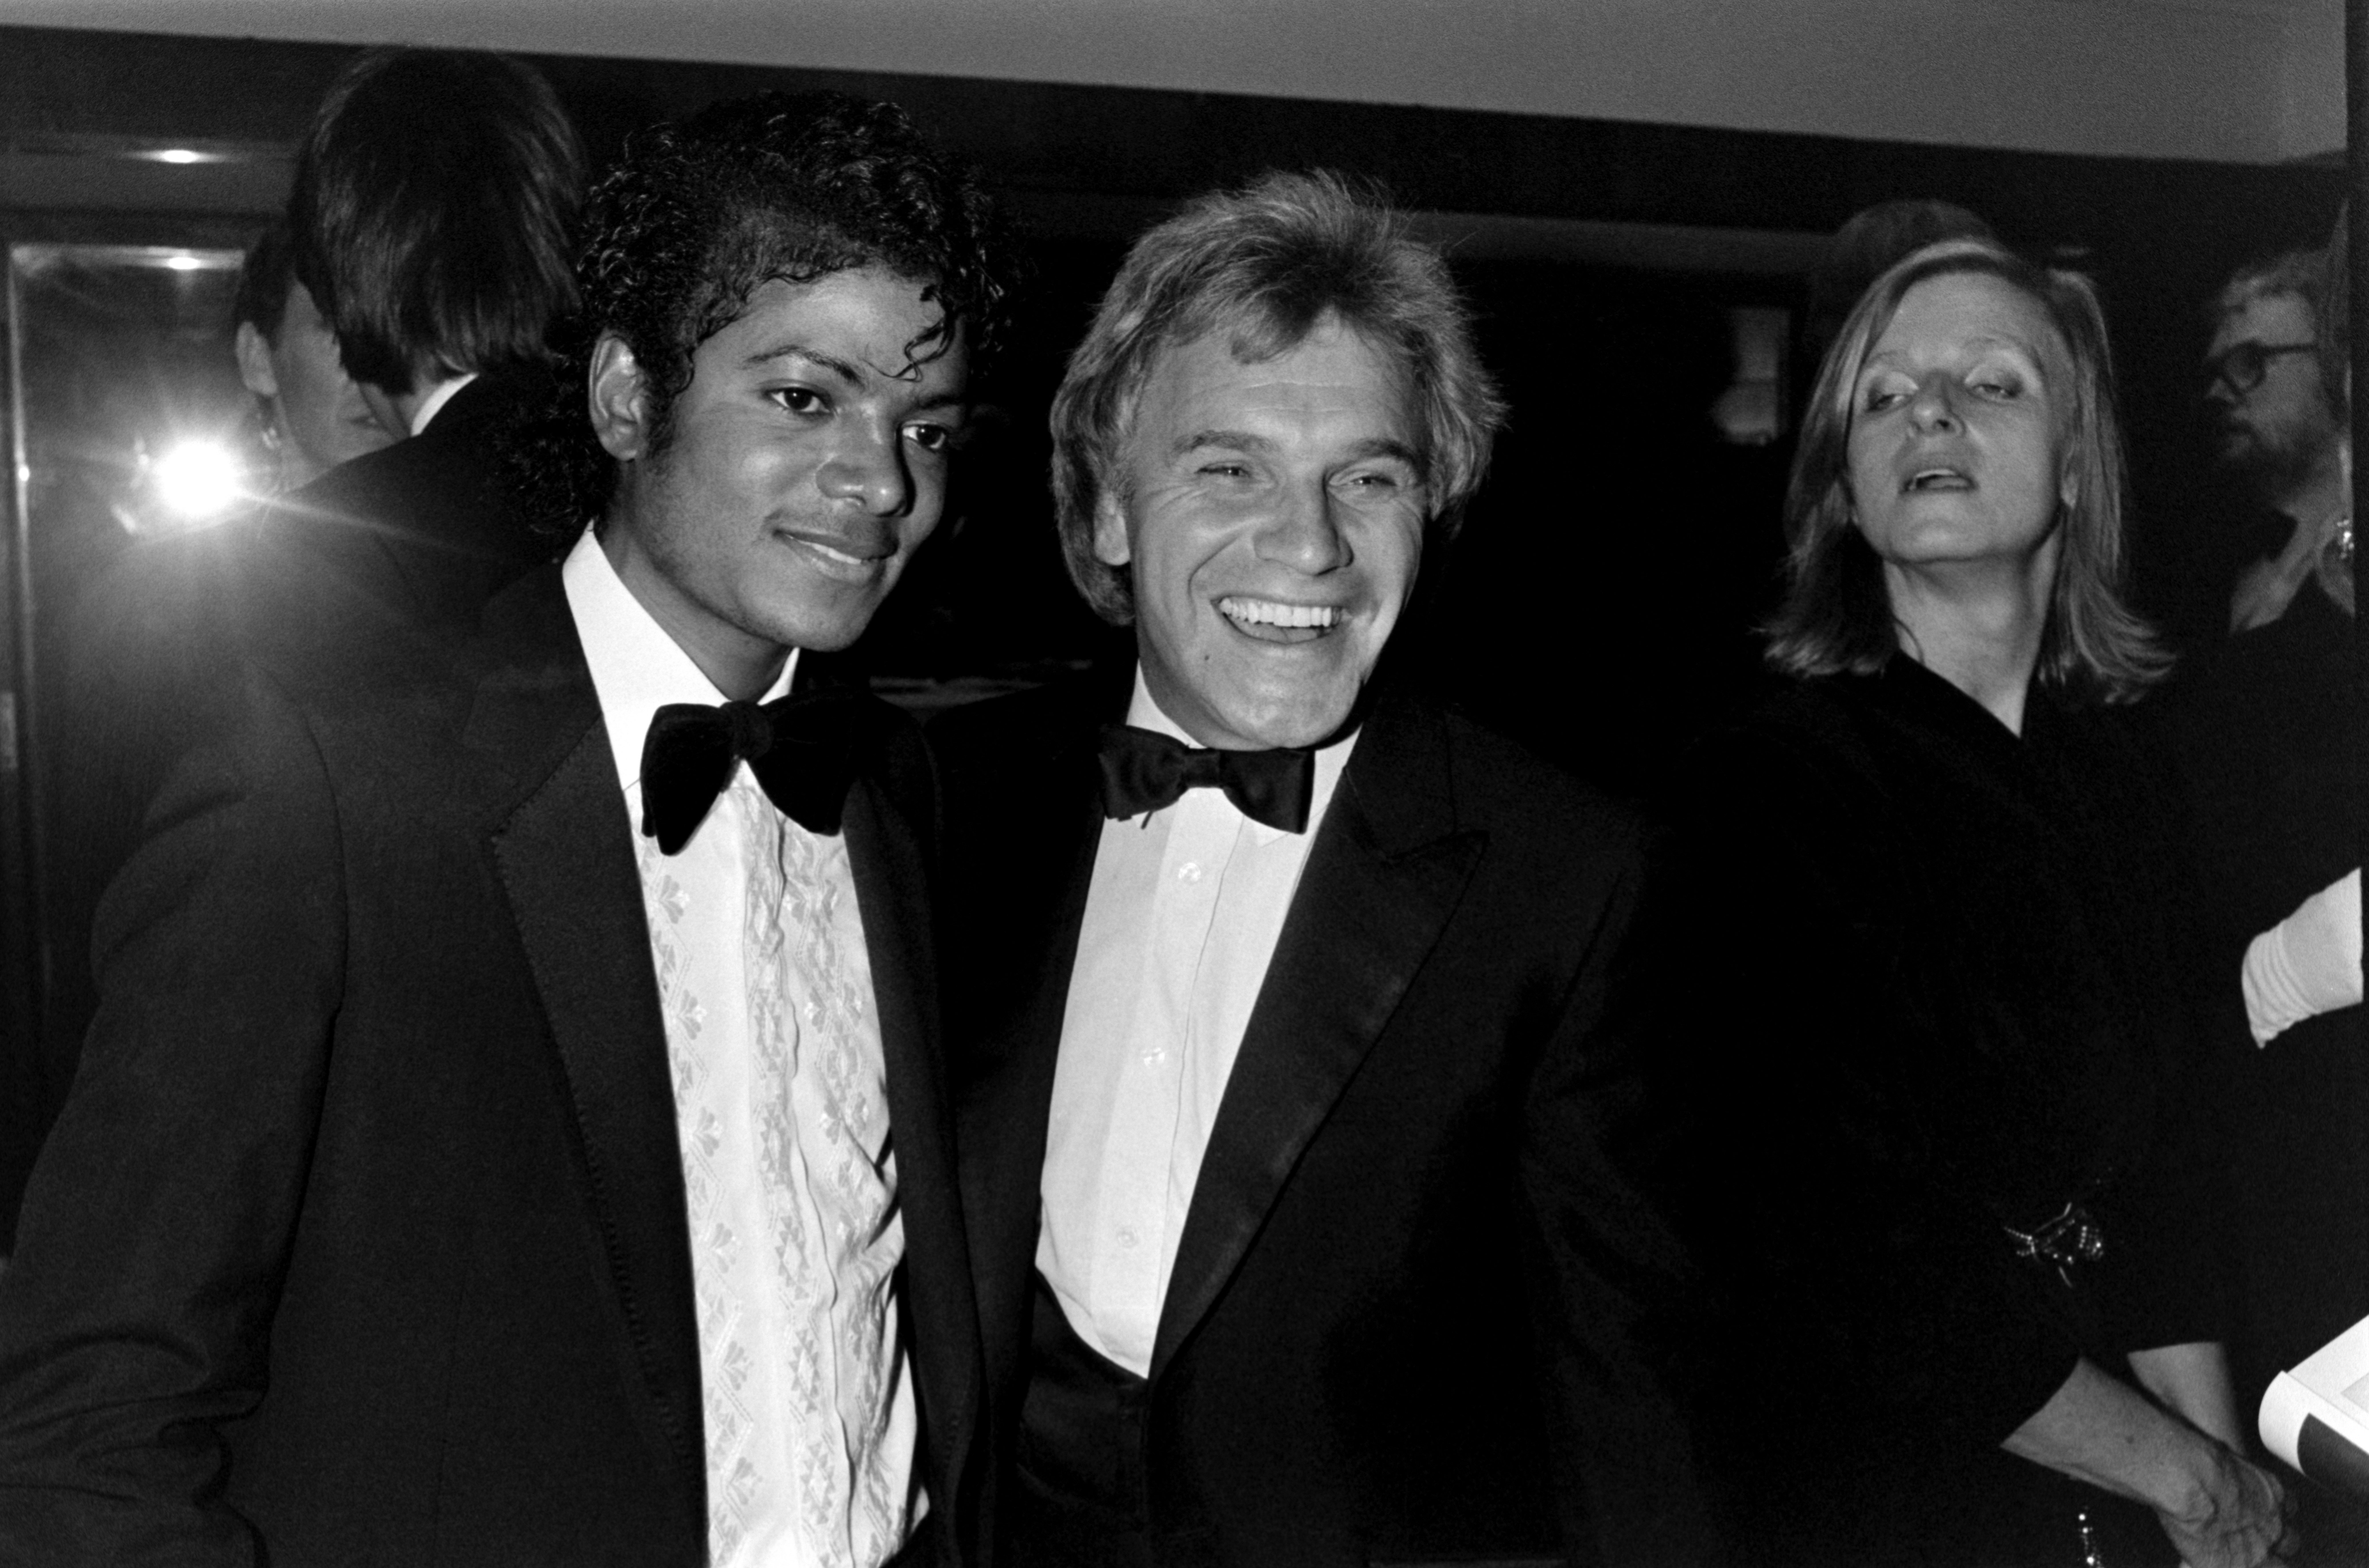 Freddie Starr with a young Michael Jackson at the Brit Awards in London,1983 | Photo: Getty Images